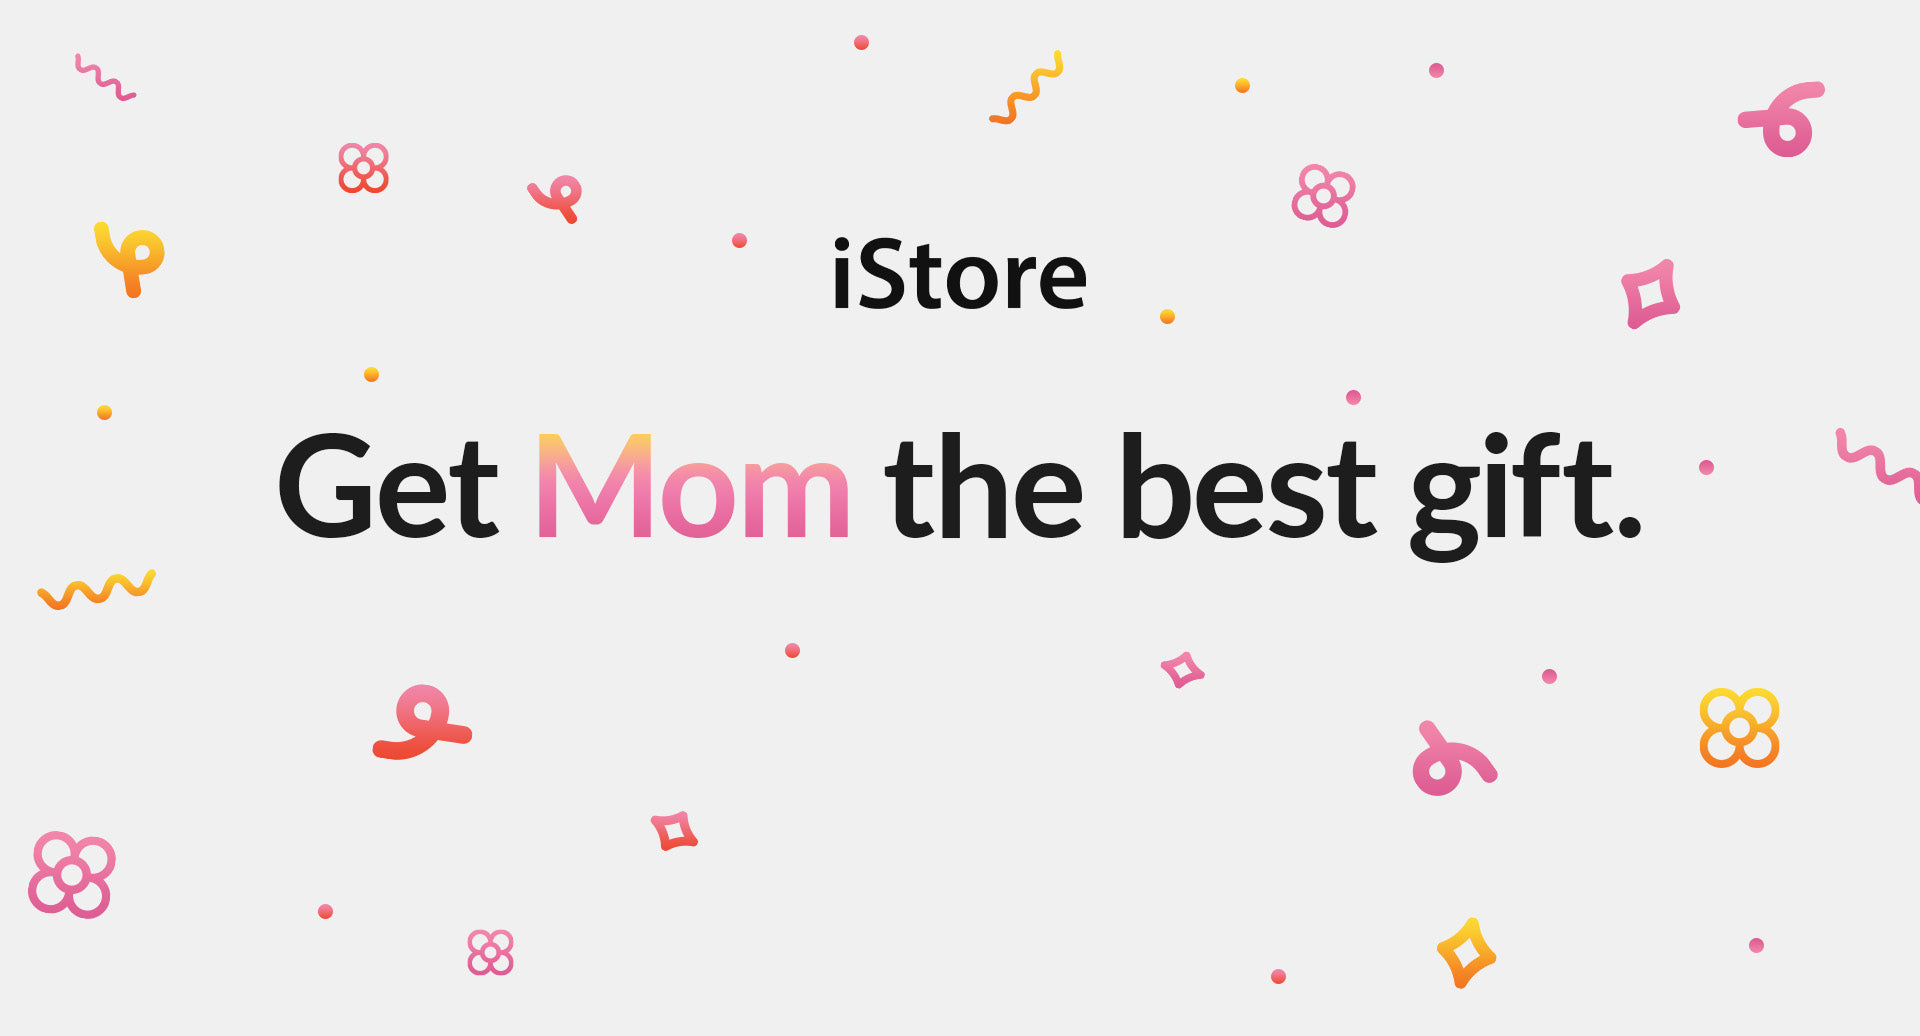 Get Mom the best gift with our exclusive deals!